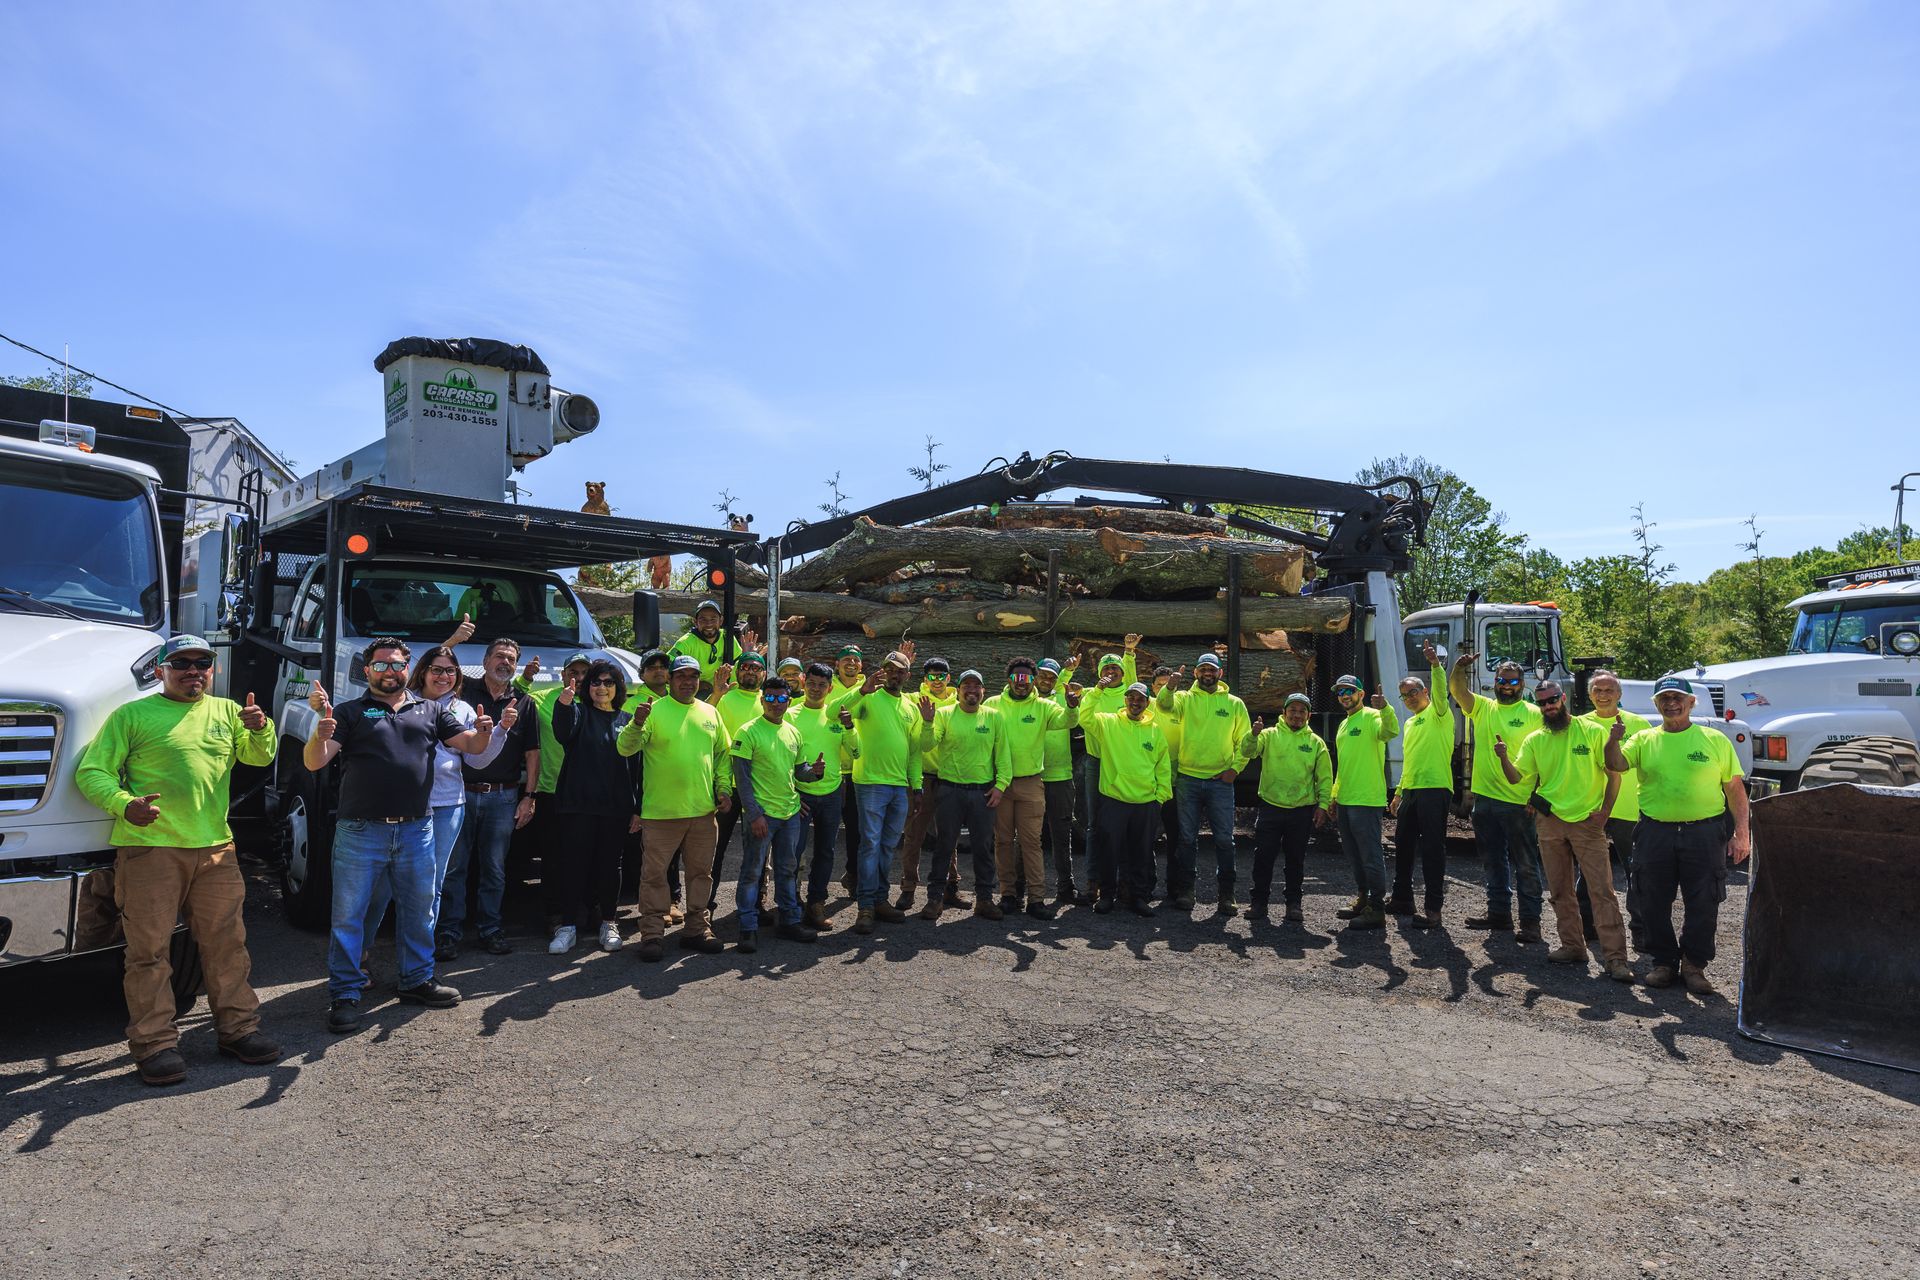 A group shot of the Capasso Landscaping crew standing in front of their service trucks